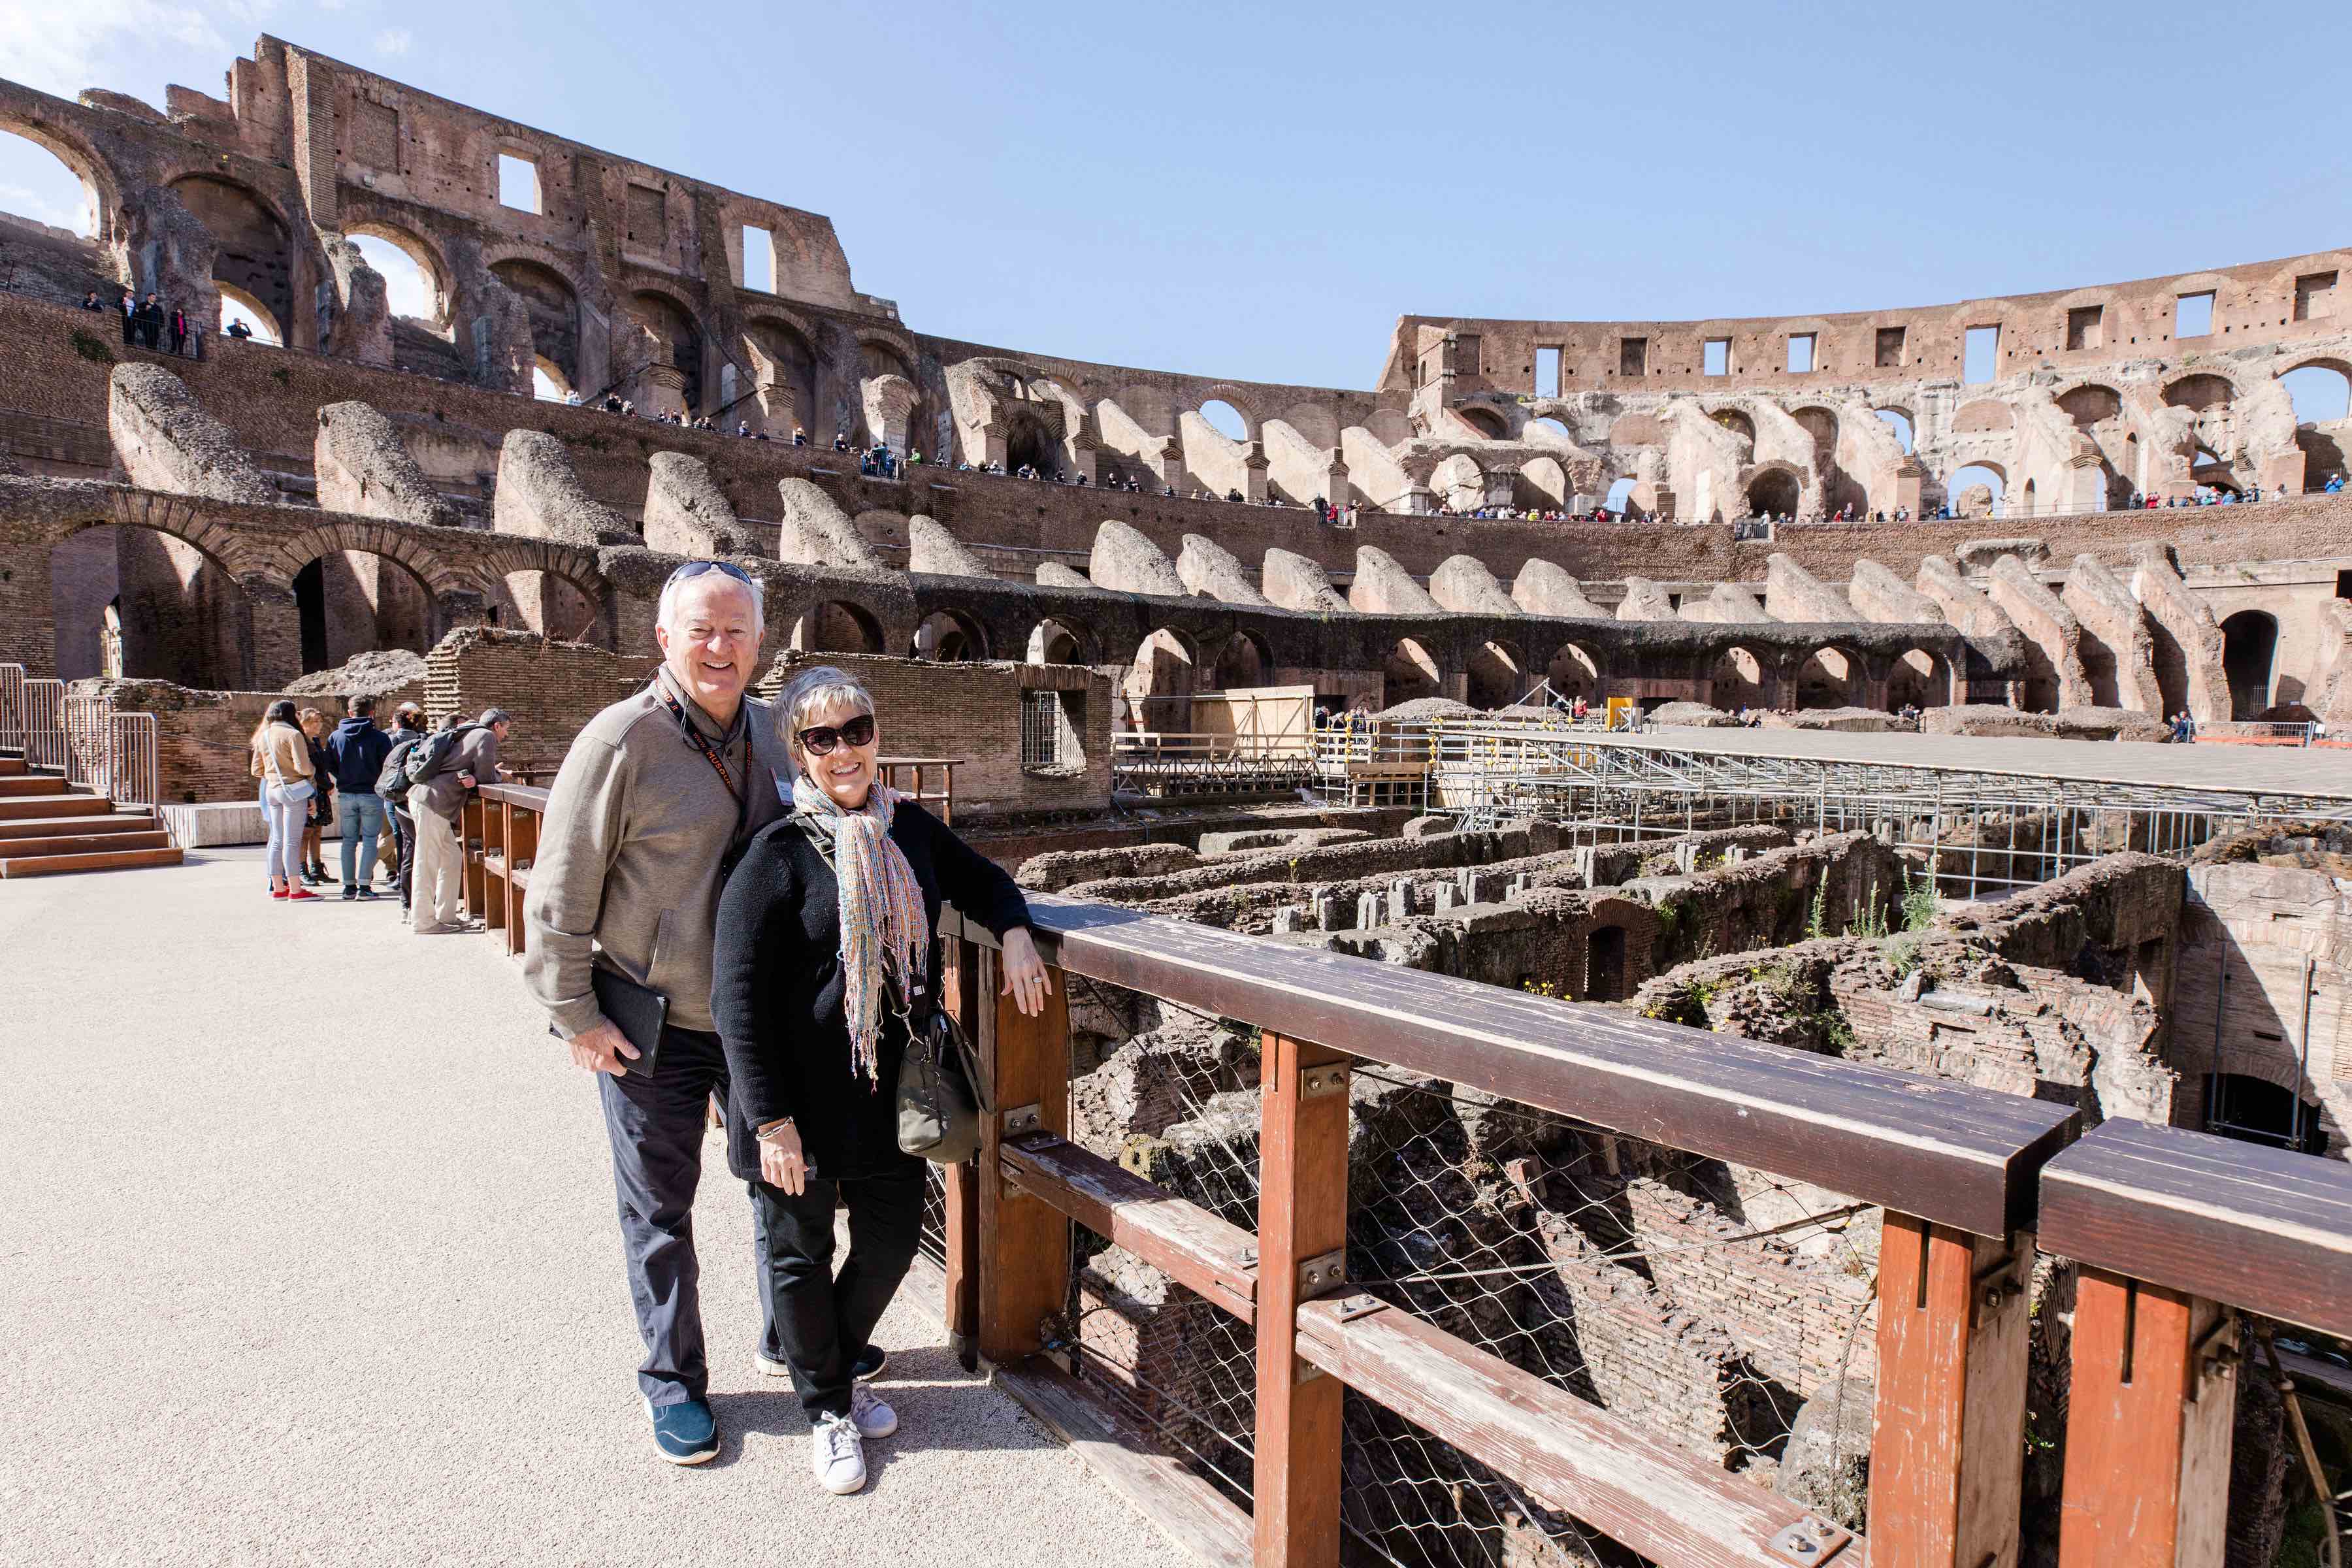 Christian travelers standing and smiling at the Colosseum in Rome, Italy